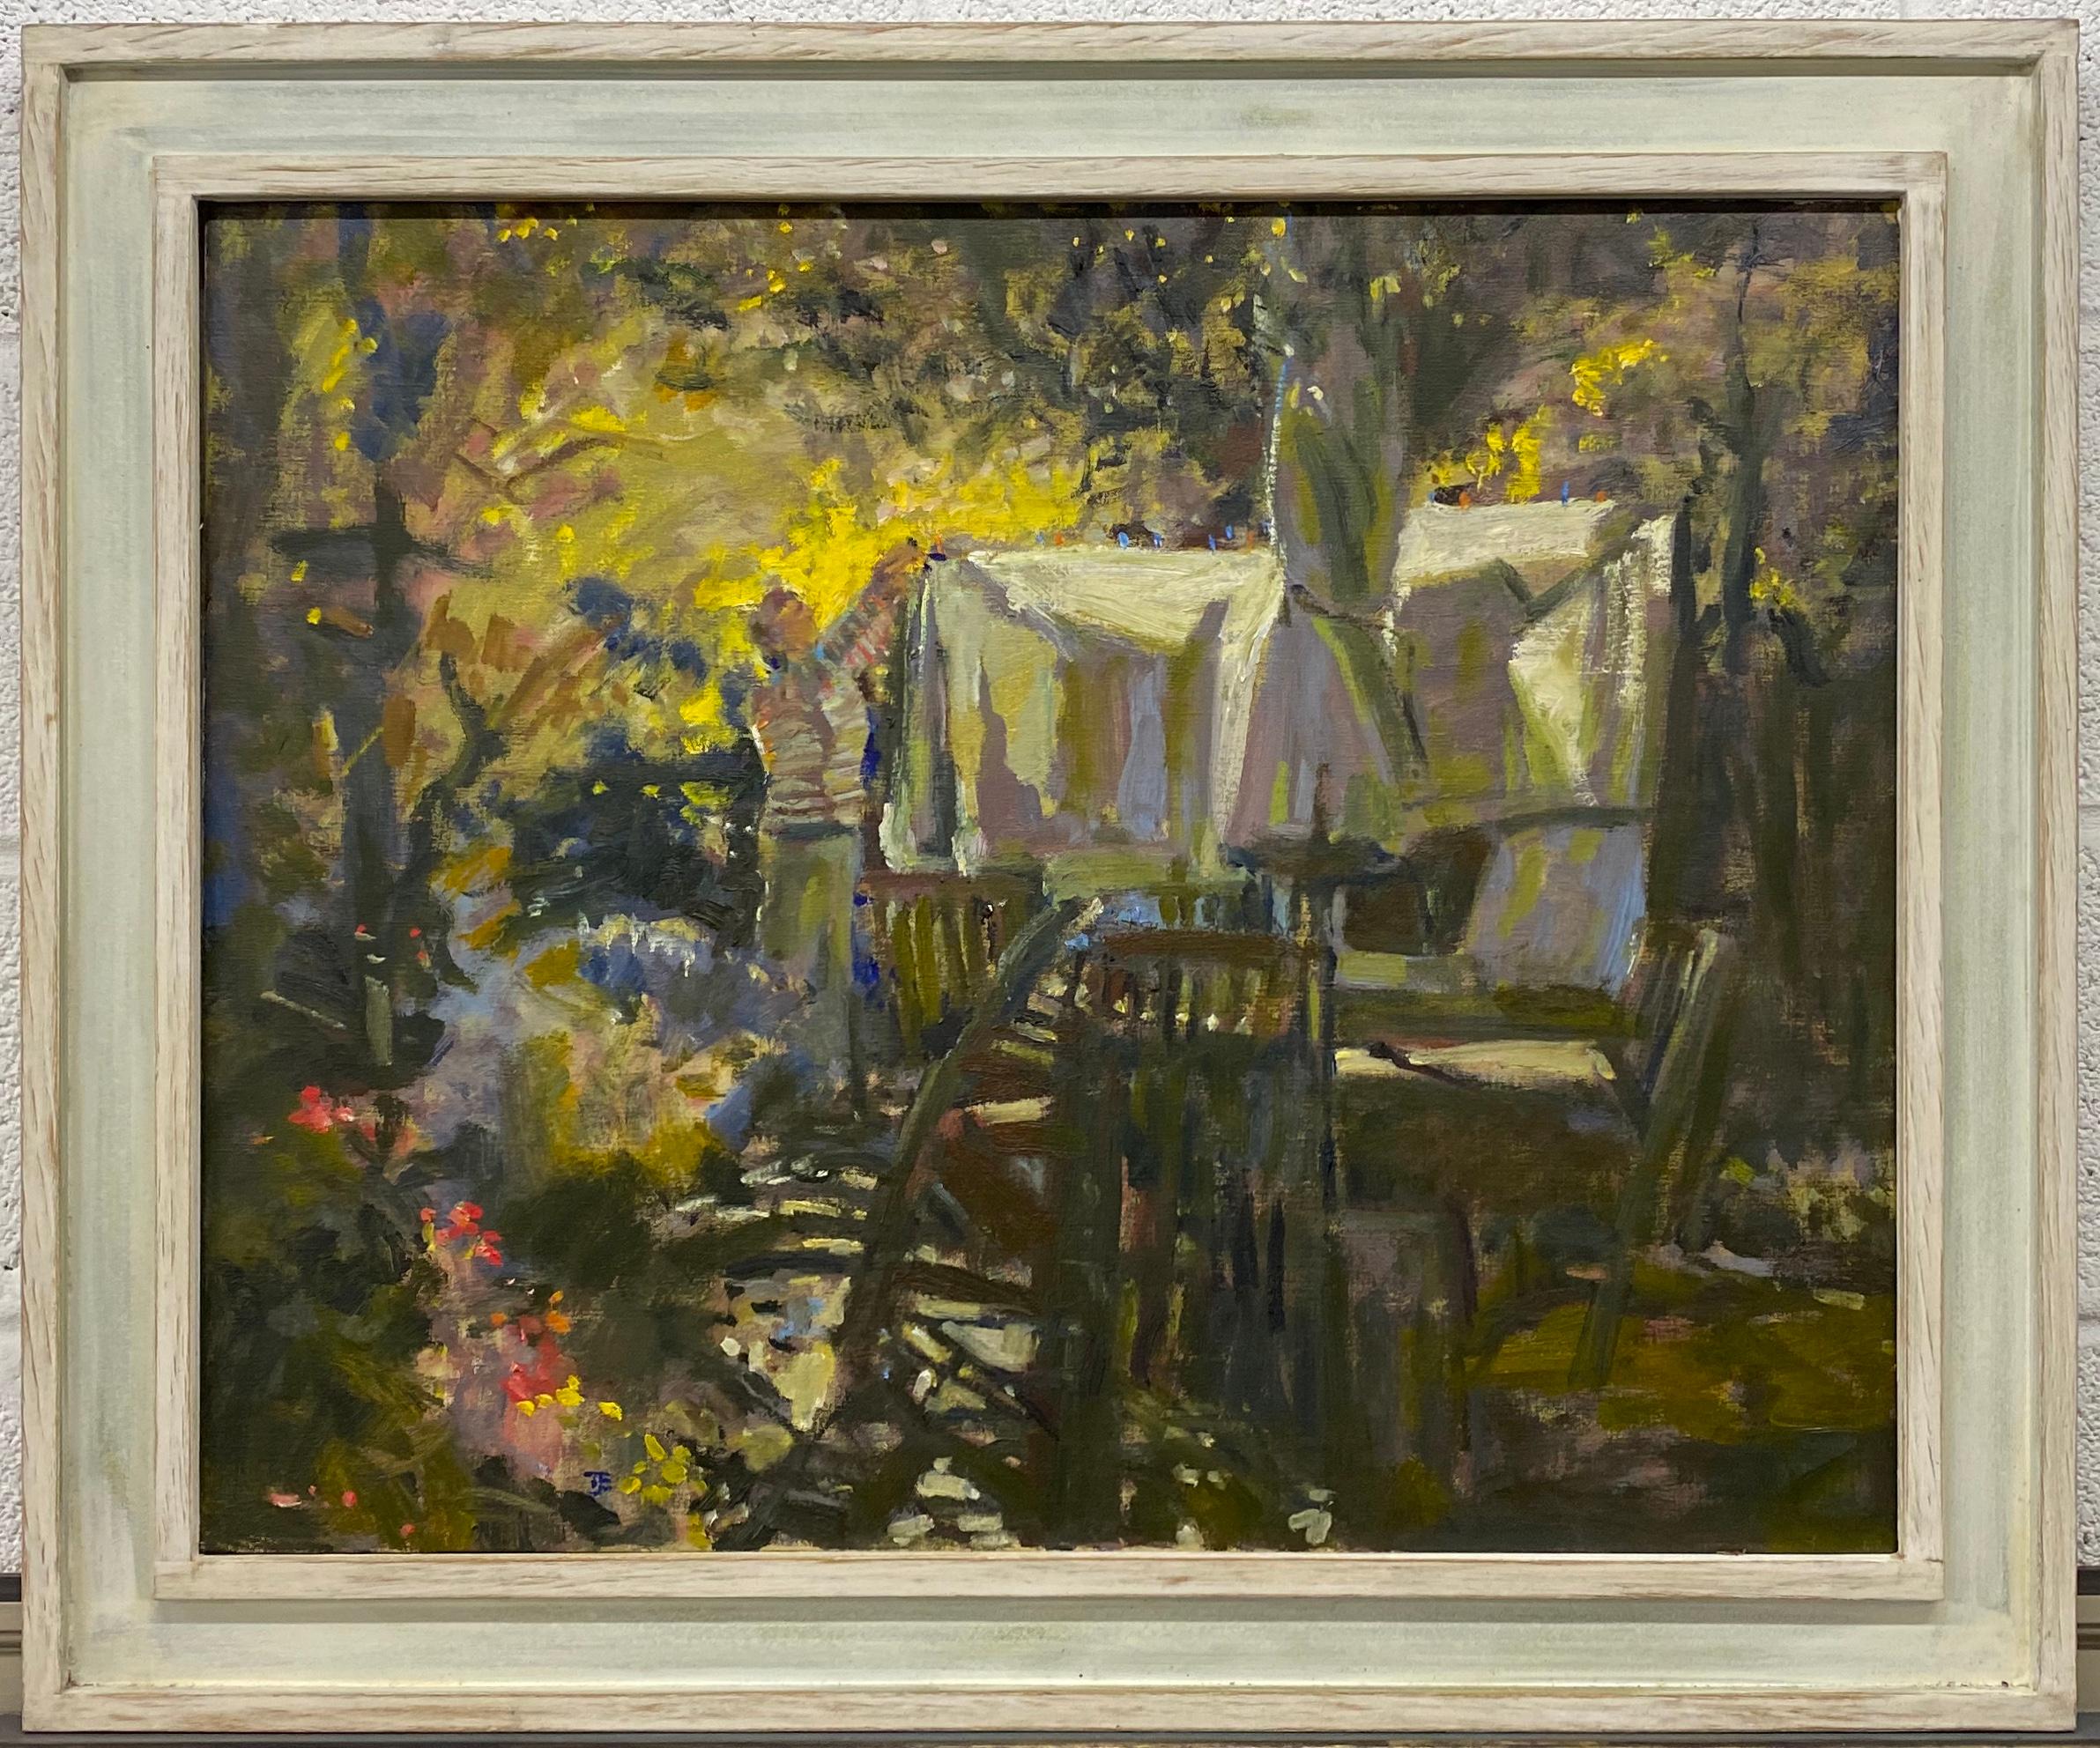 Washing and lights in the garden - Painting by Tom Coates